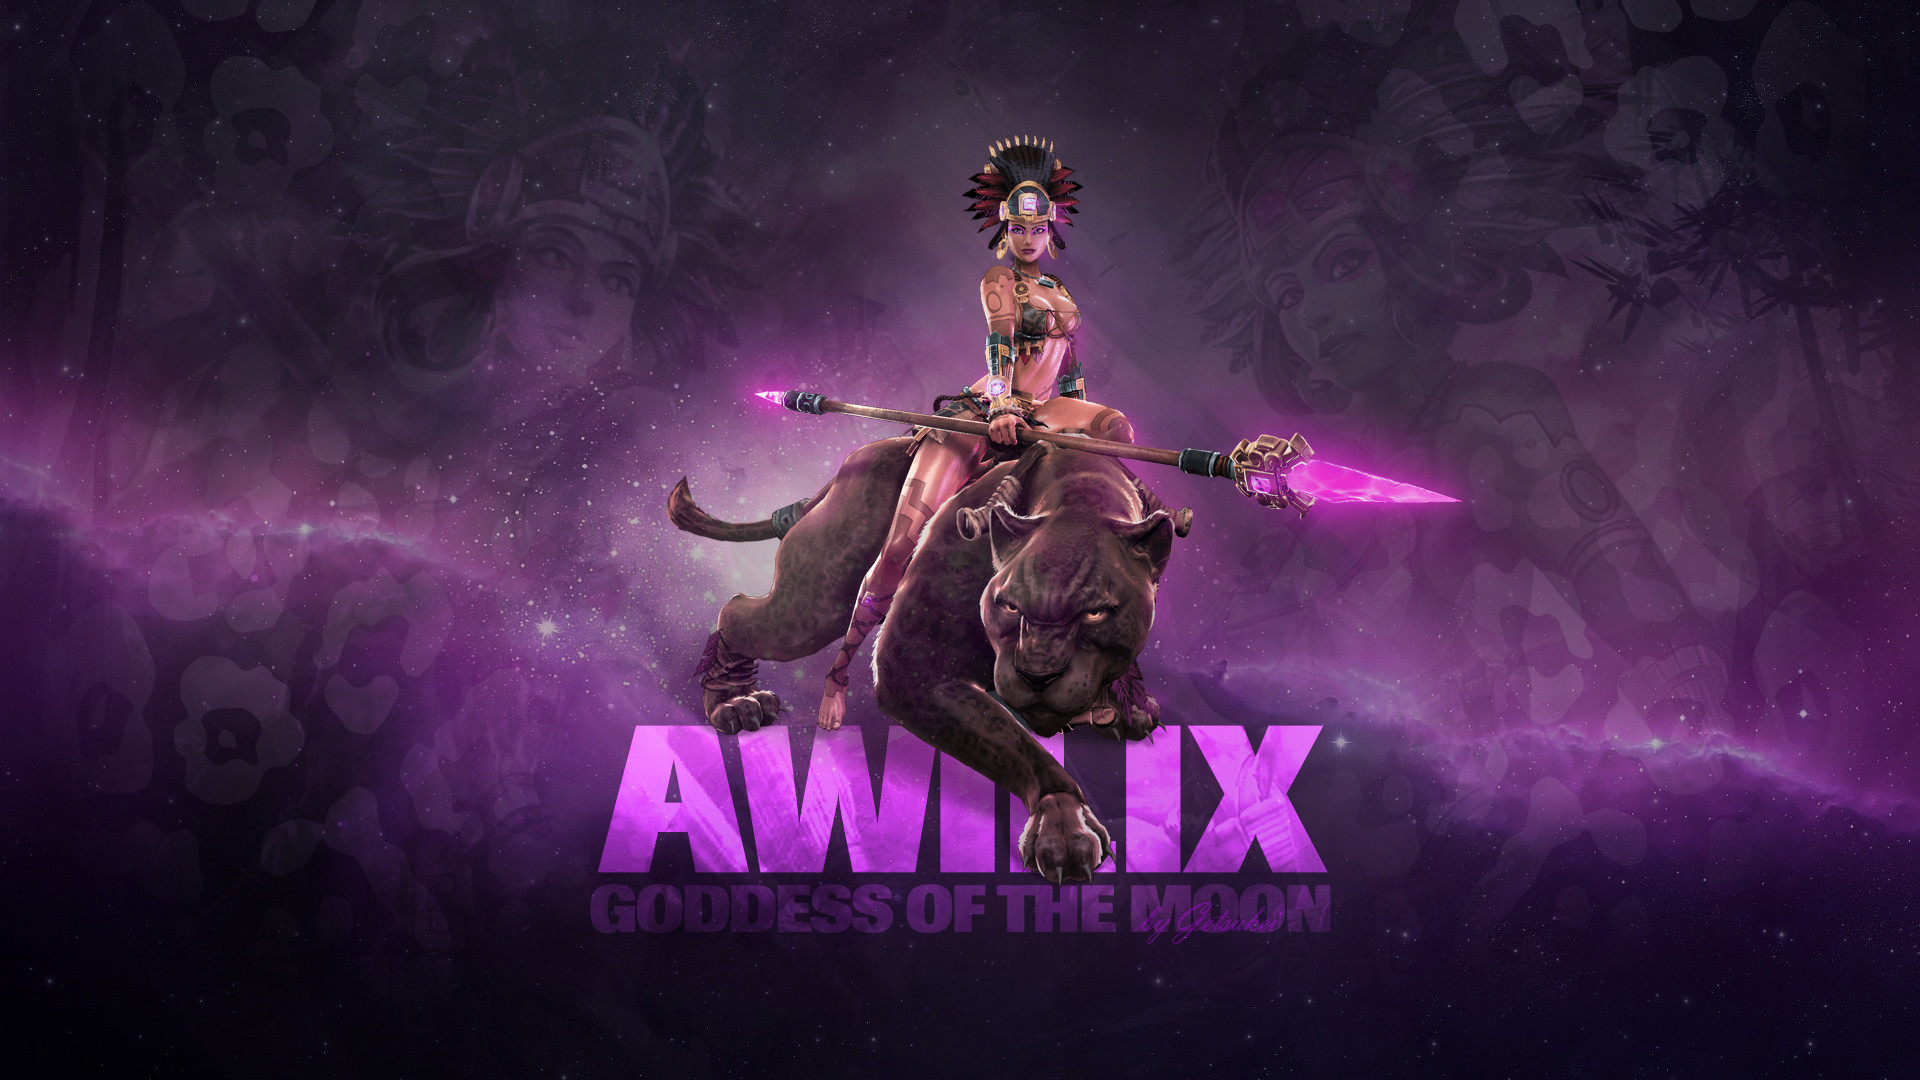 1920x1080 ... SMITE - Assassins Wallpaper (Awilix Edition) by Getsukeii on .